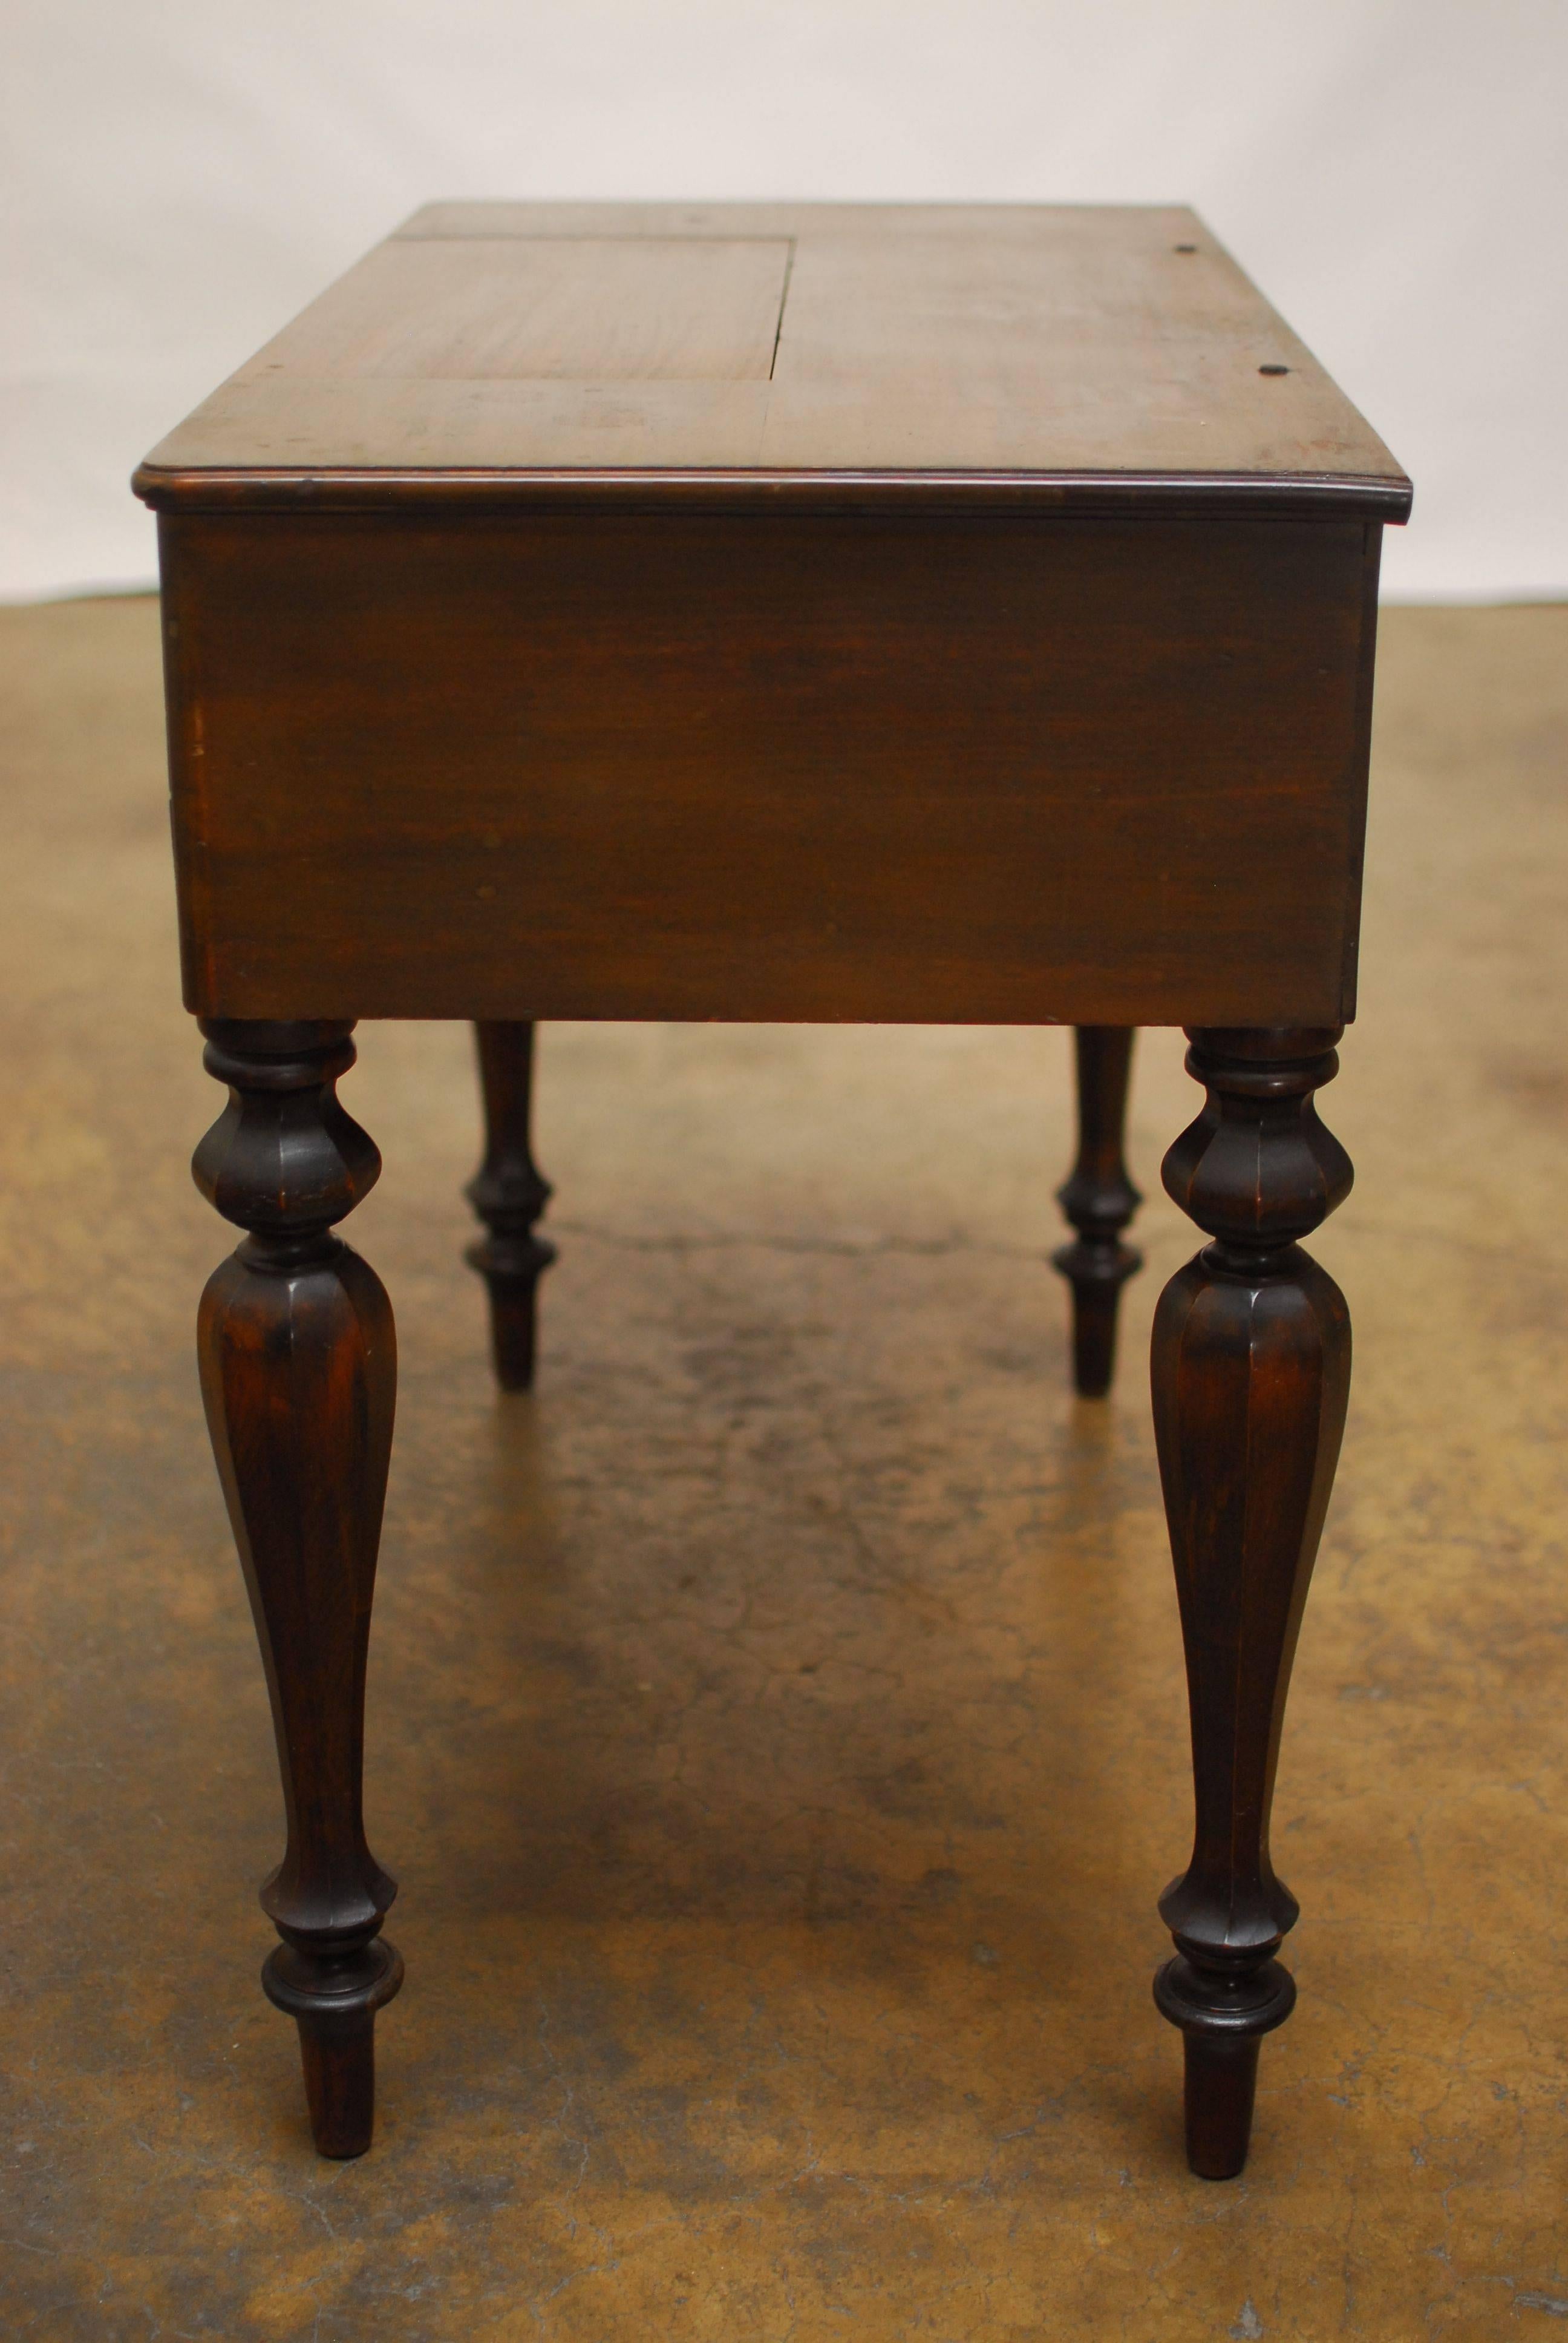 Mahogany writing table or secretary with a flip-top hinged single drawer that reveals a pullout desktop with multiple storage bins. Known as a spinet or piano desk because when closed it resembles a musical instrument of the harpsichord family.